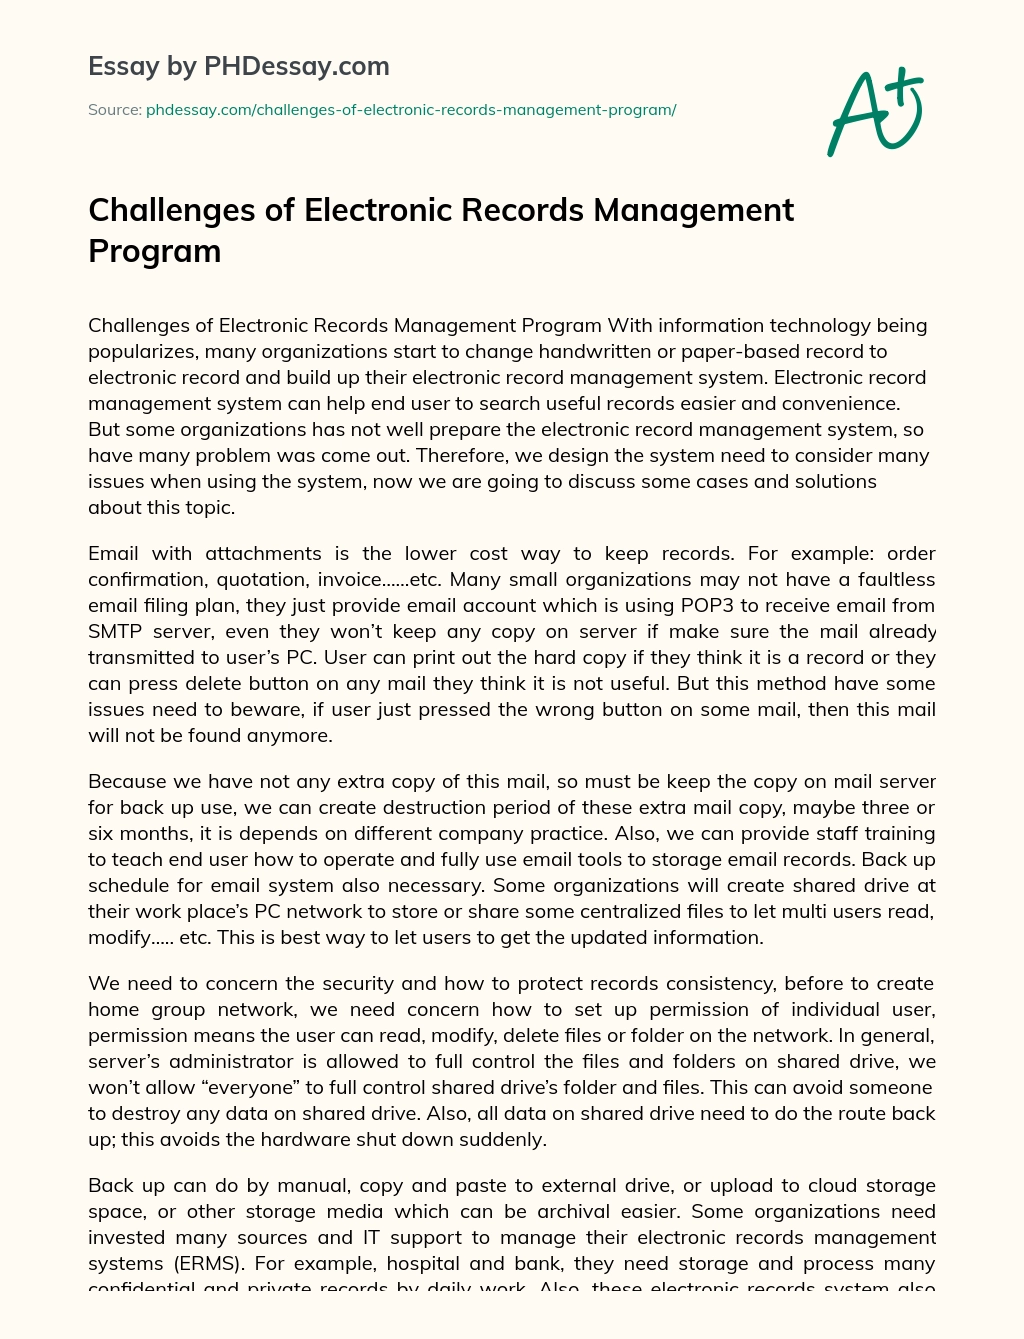 Challenges of Electronic Records Management Program essay